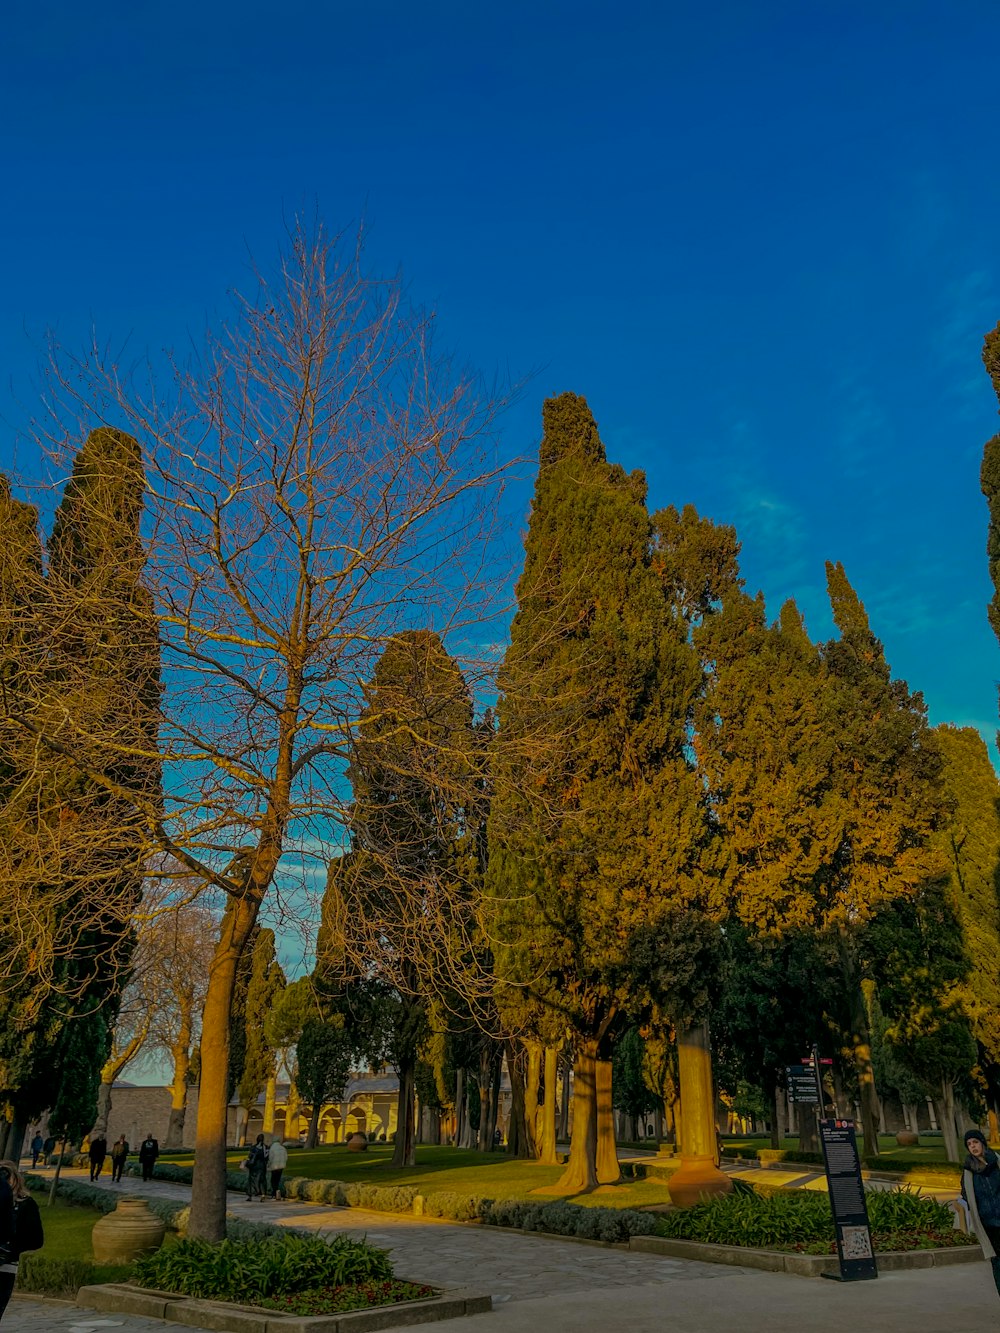 a group of trees in a park with a blue sky in the background